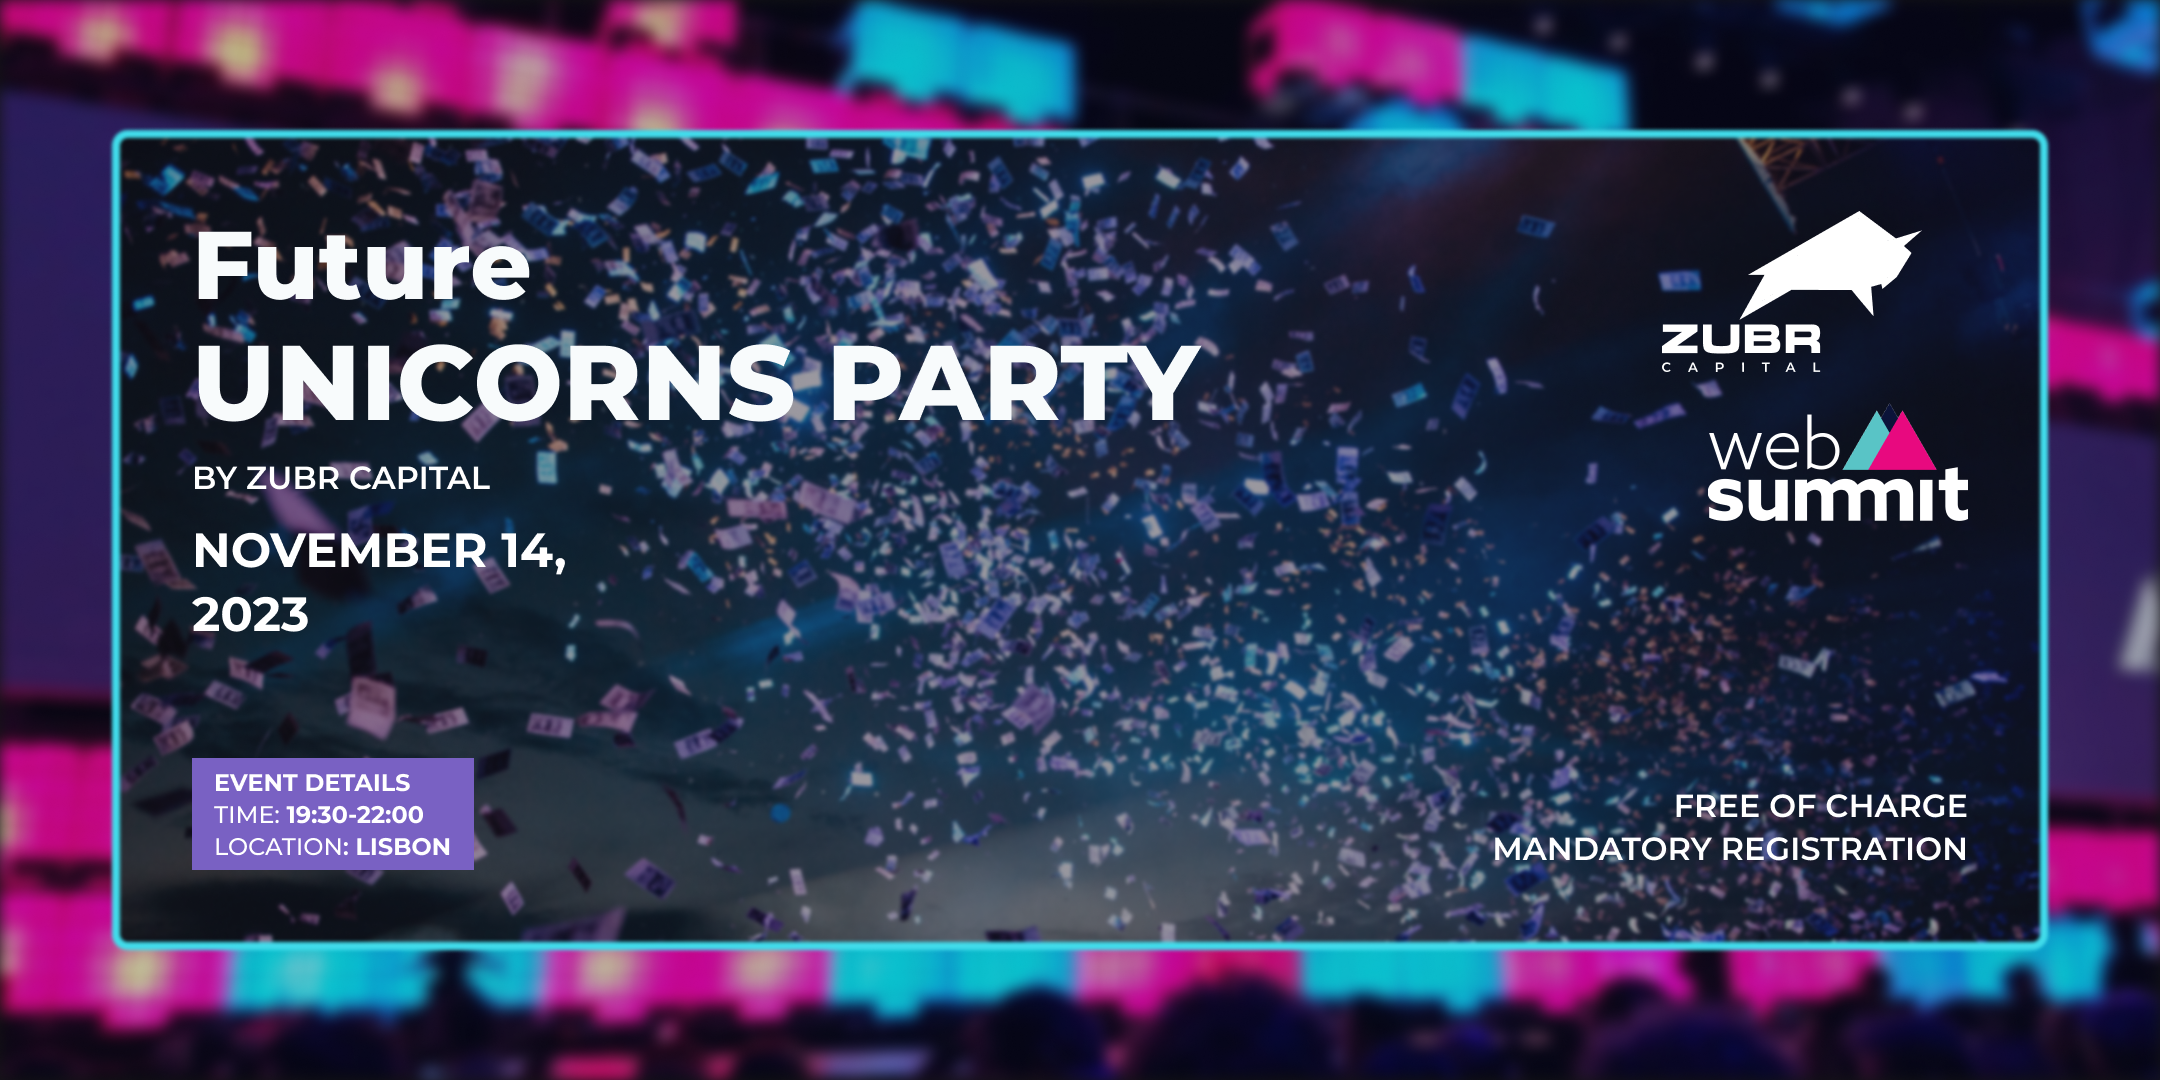 Future unicorns party by Zubr Capital